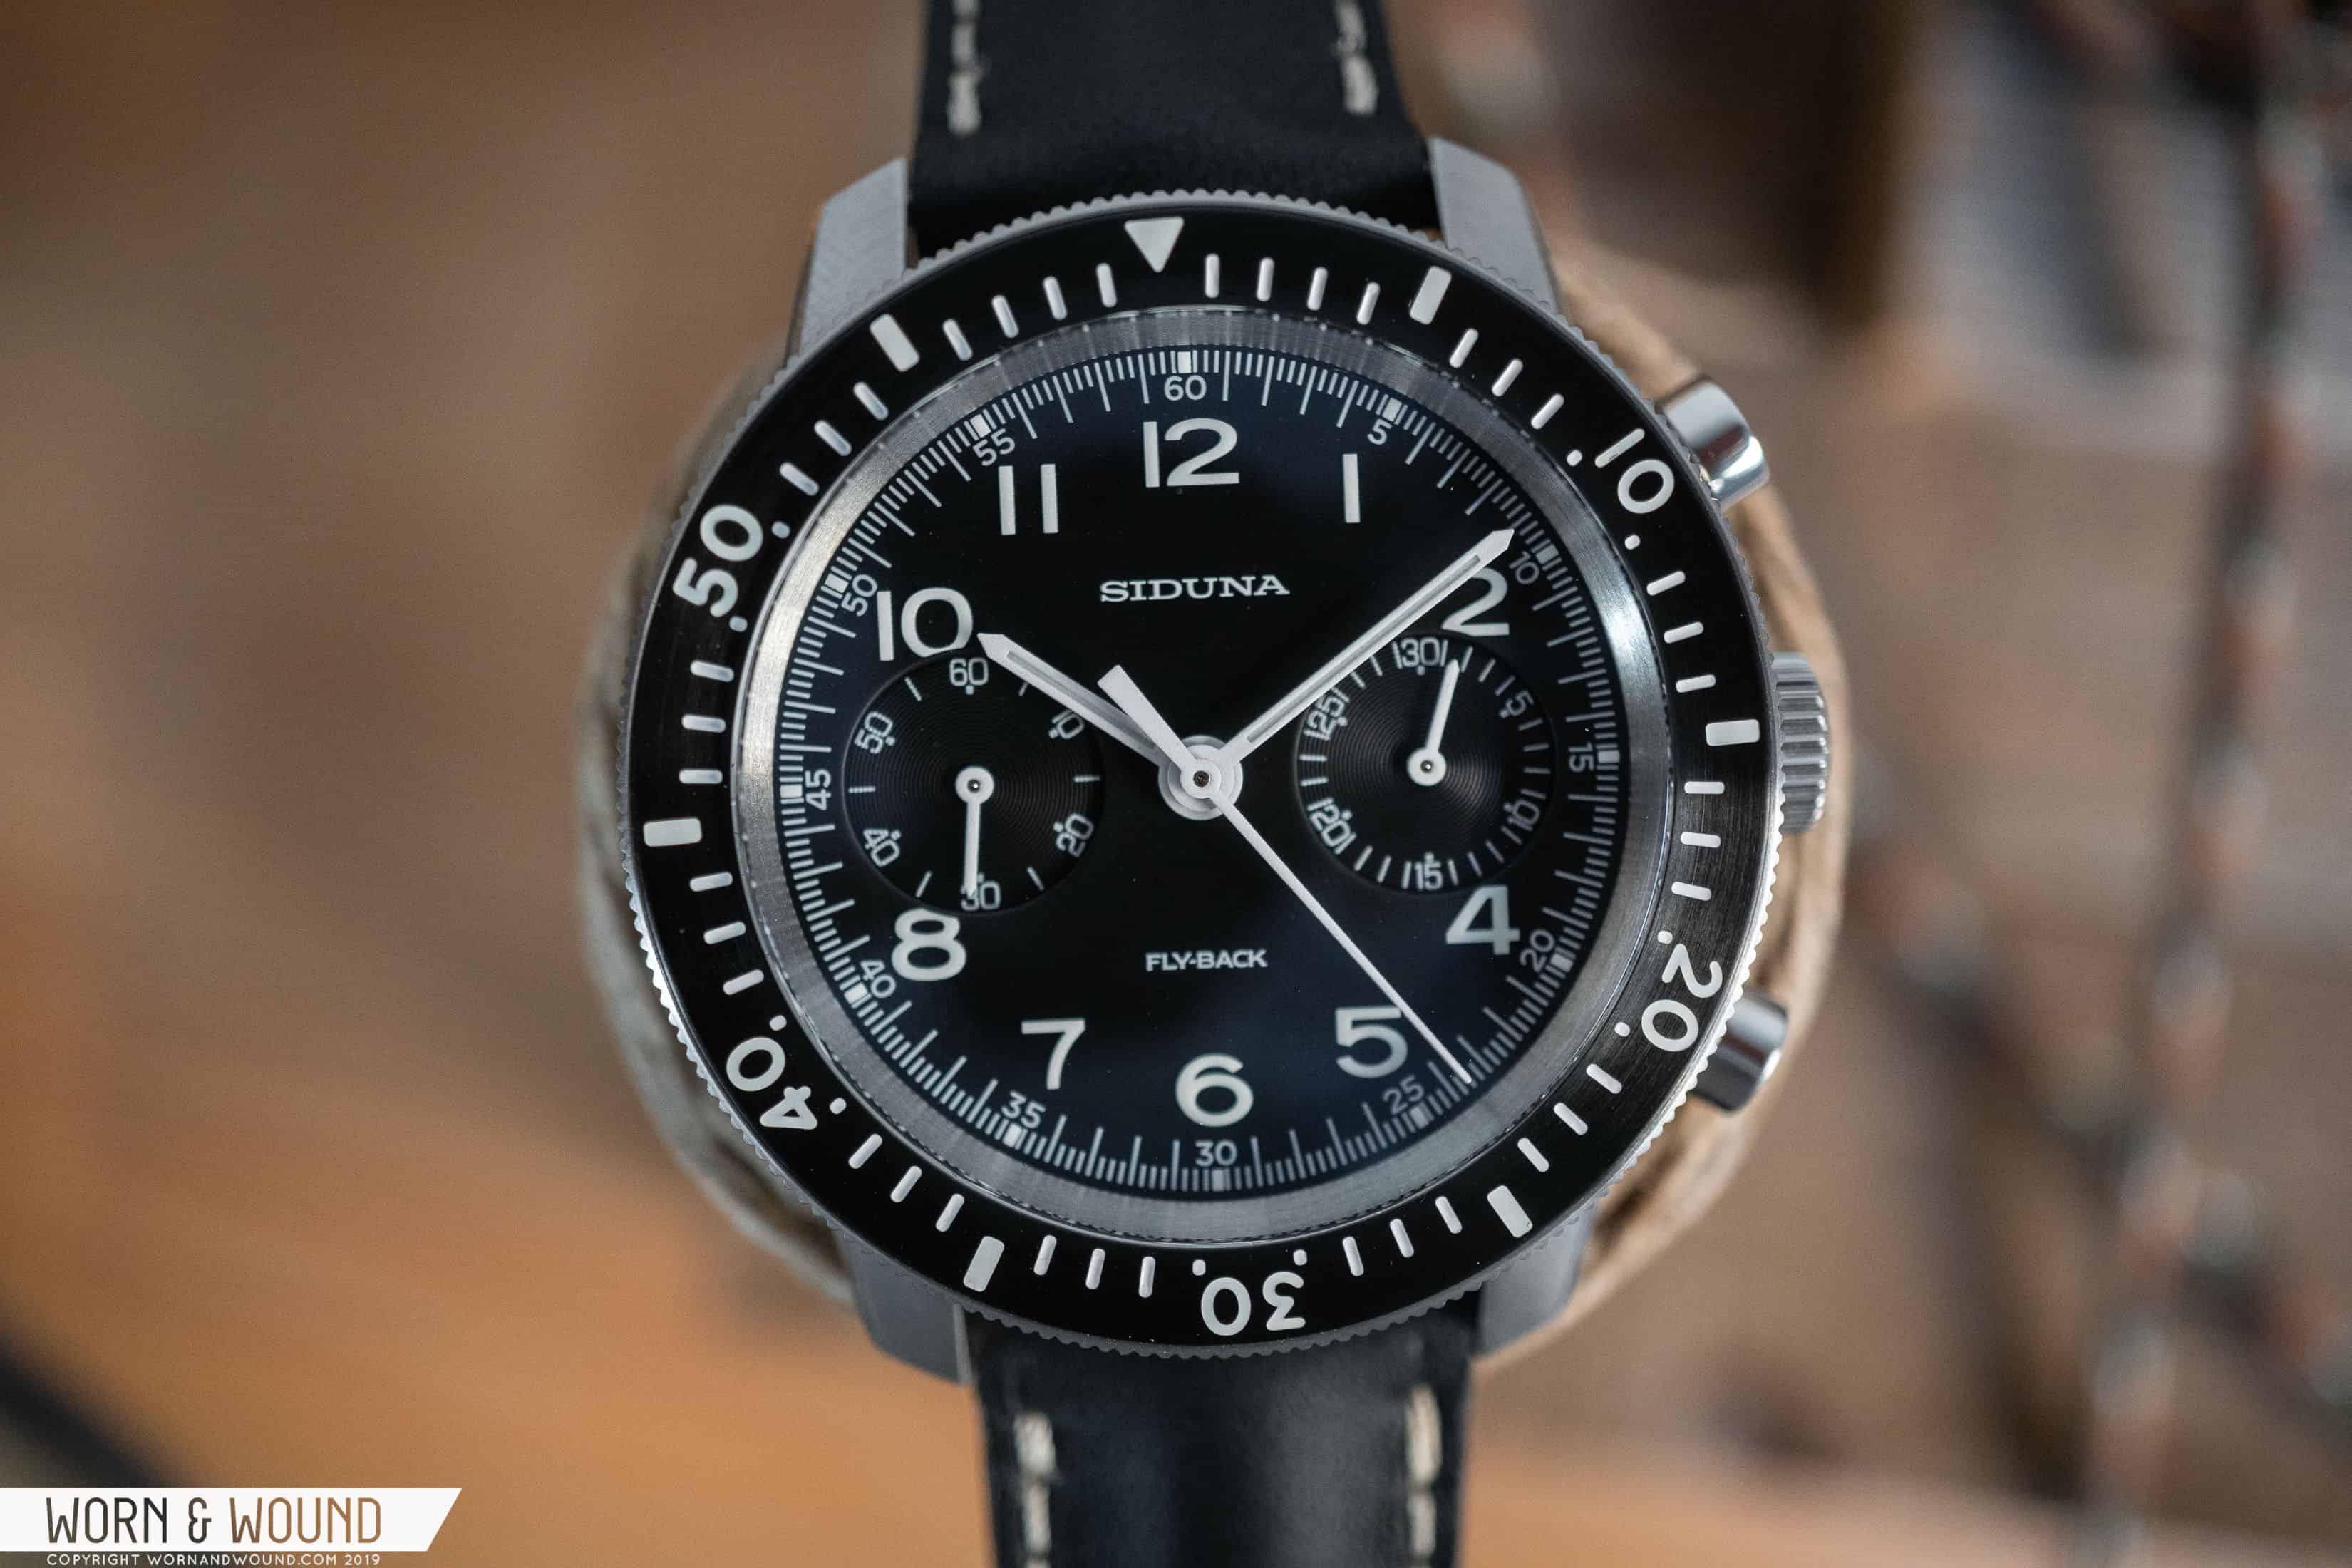 Review: Siduna M3440 Professional Fly-Back Chronograph